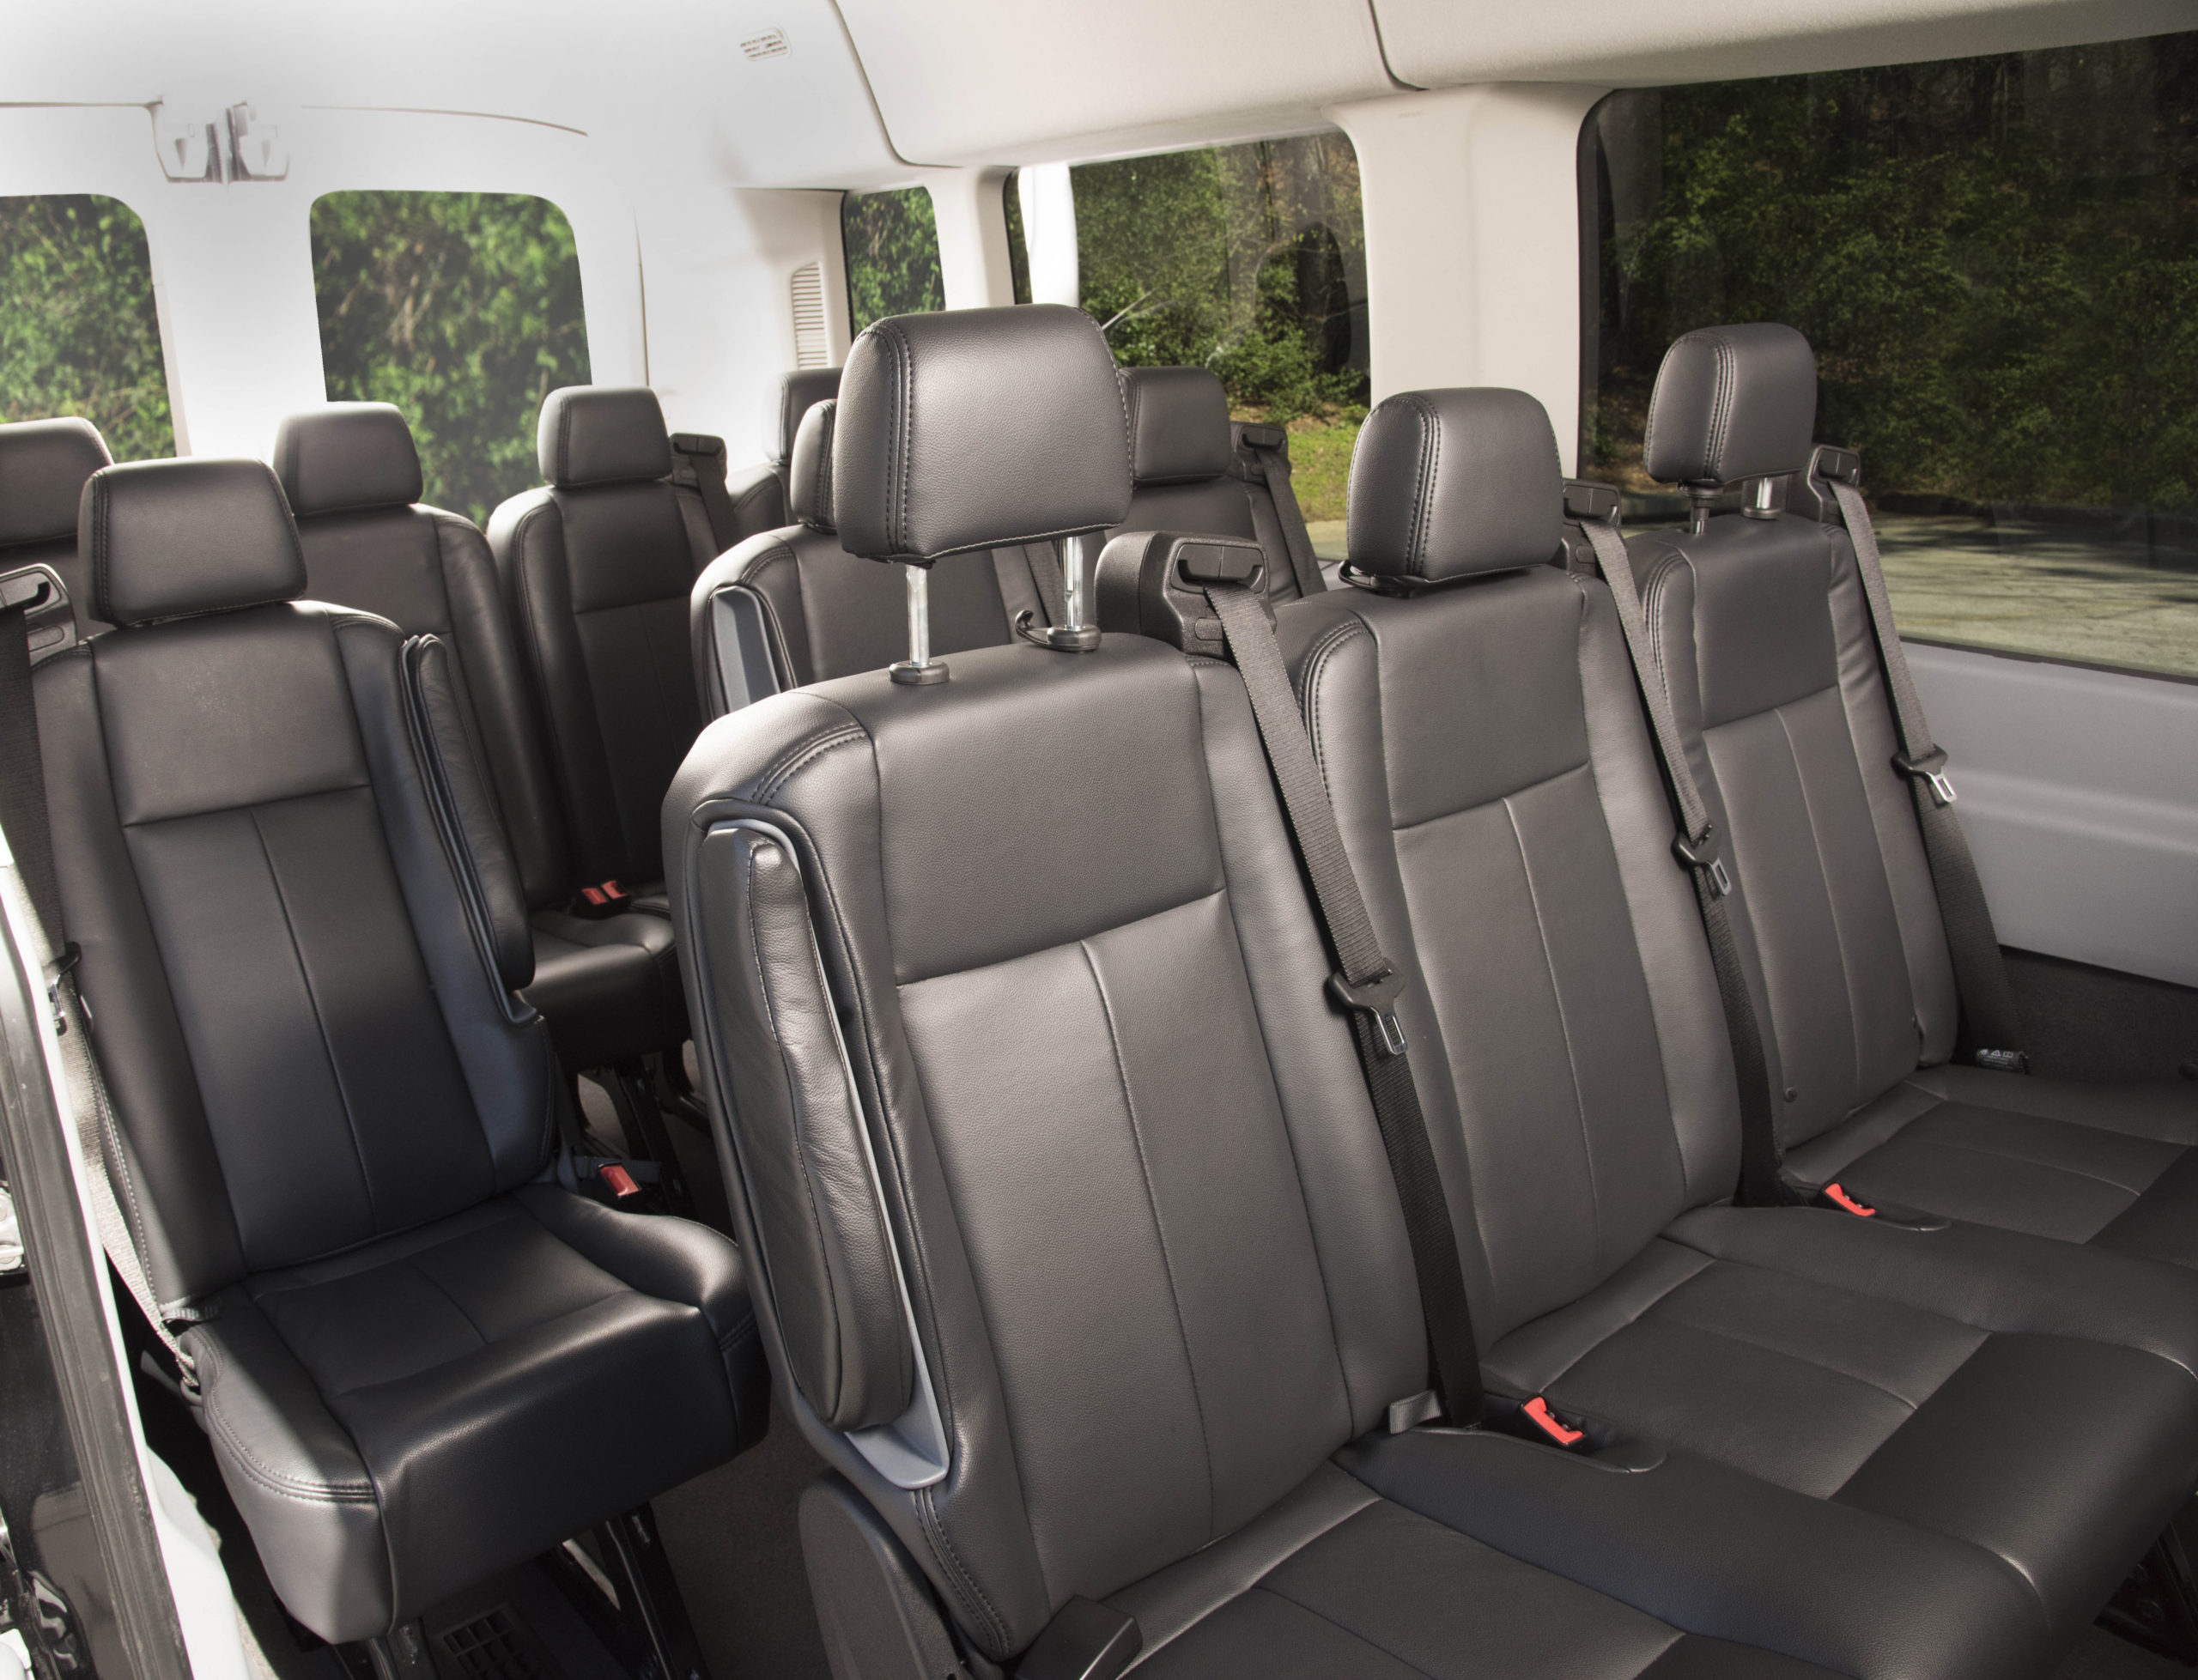 Ford Transits Available at Atlantic Limo - Atlantic Limo